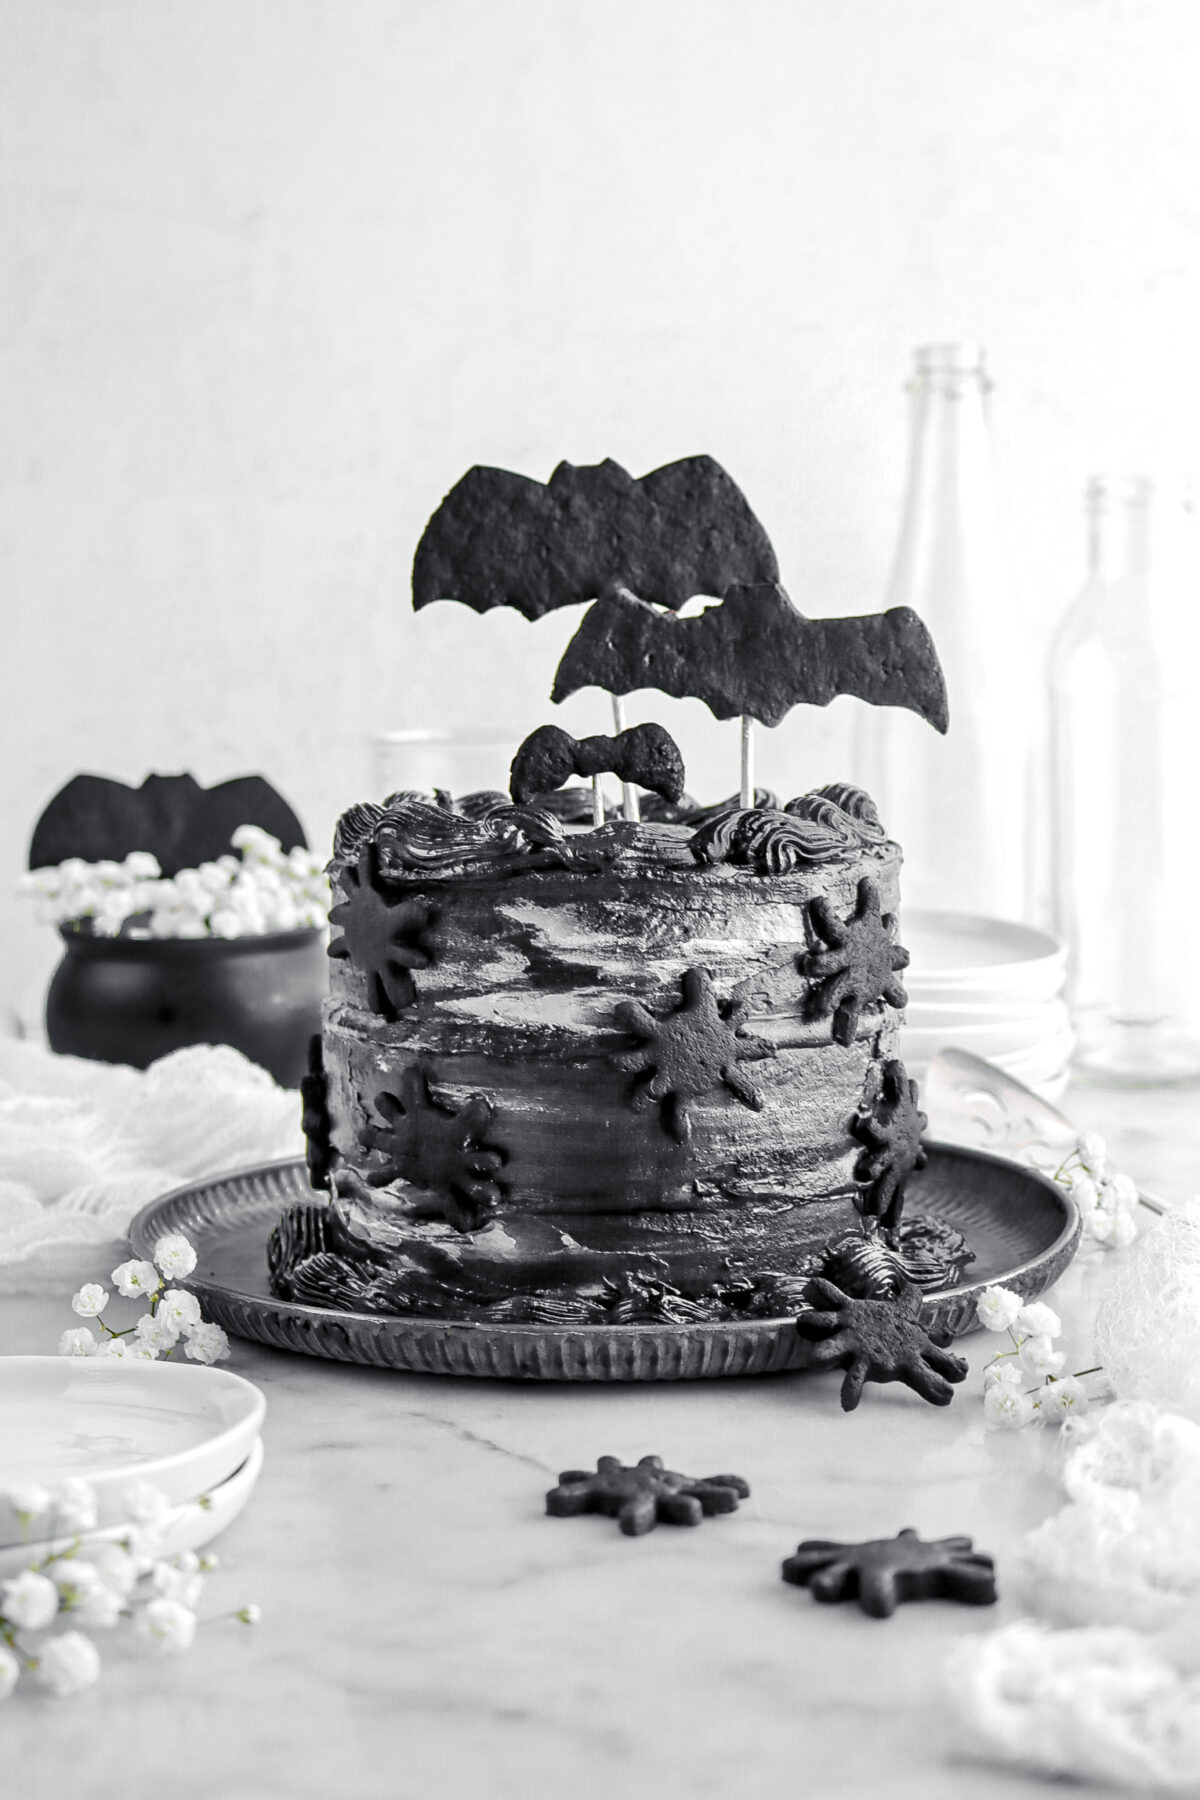 black cake with bats cookies on top and spiders on the side on metal plate with white flowers around and white cheese cloth, black cauldron behind, and empty glasses.